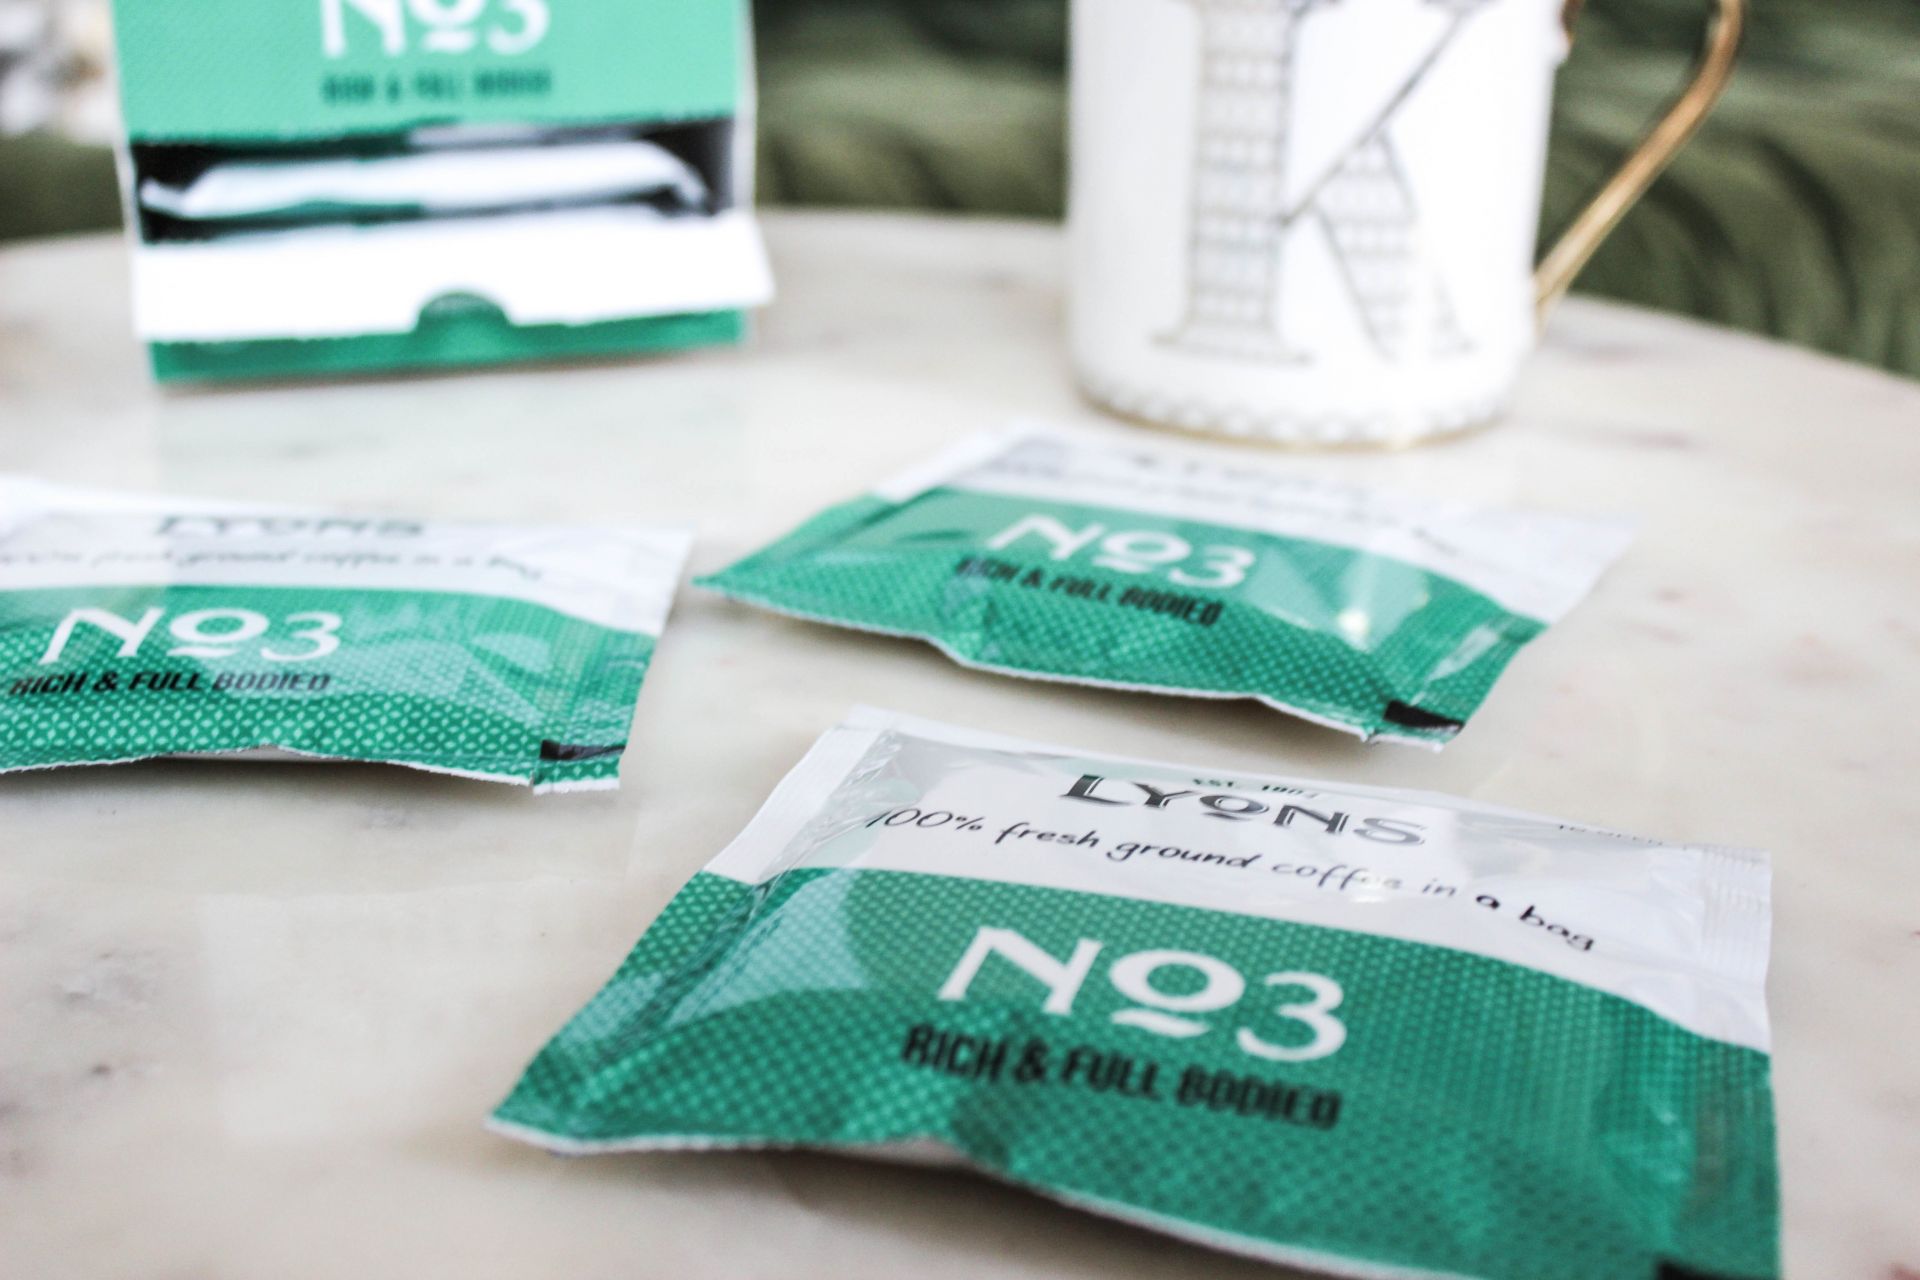 lyons coffee bags review